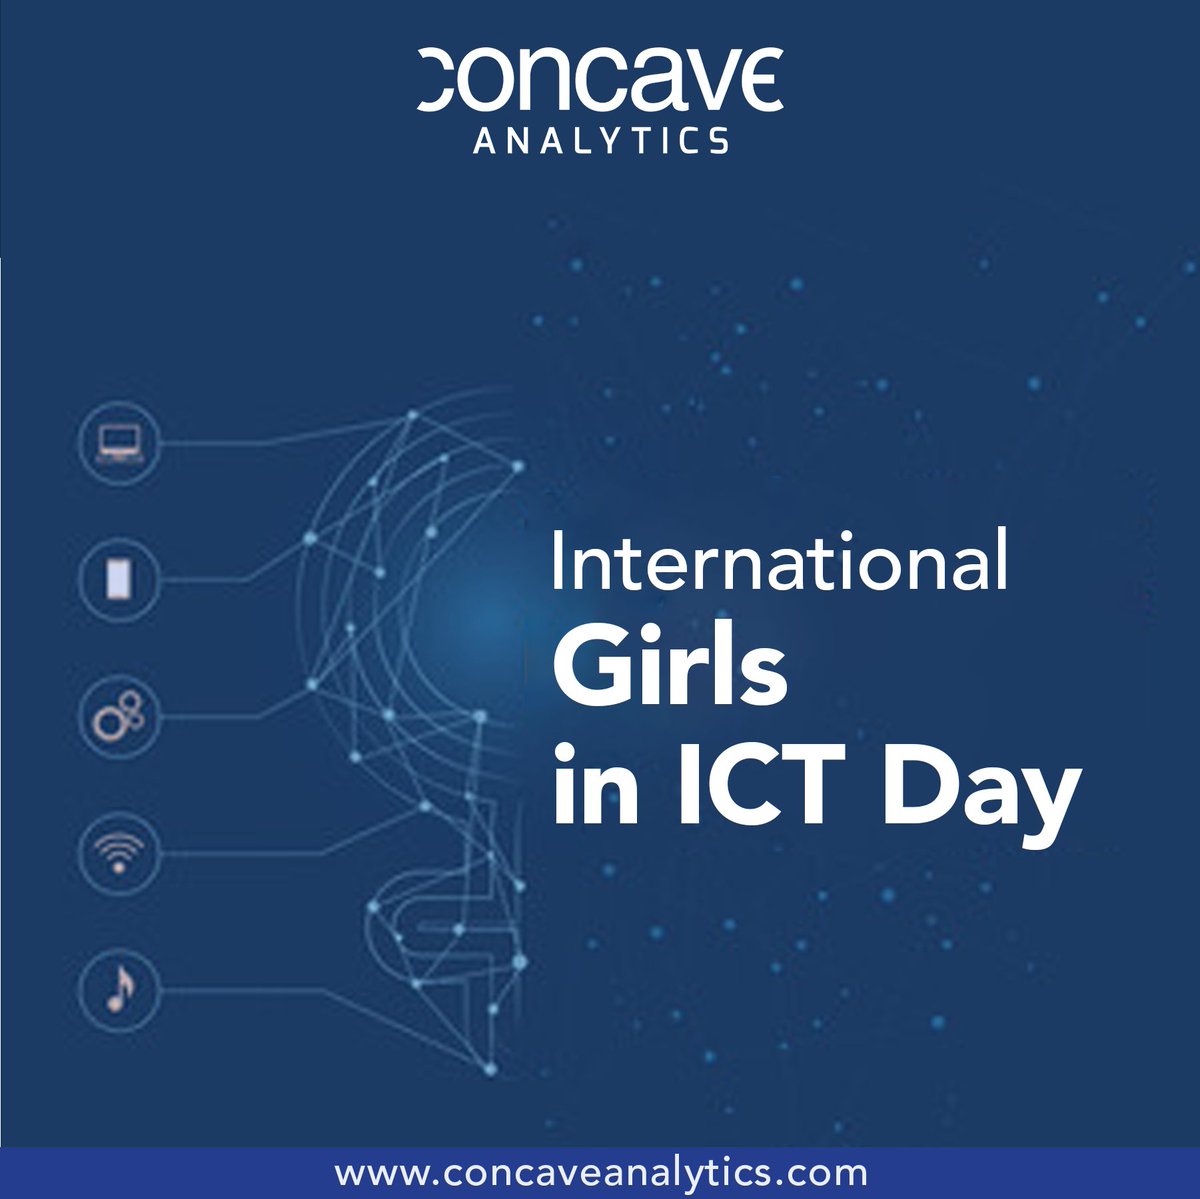 Empowering the next generation of tech leaders! Today we celebrate International Girls in ICT Day, inspiring girls worldwide to pursue their passions in technology and shape the future of innovation. 

#ConcaveAnalytics #GirlsInICT #HumanSpaceFlightDay